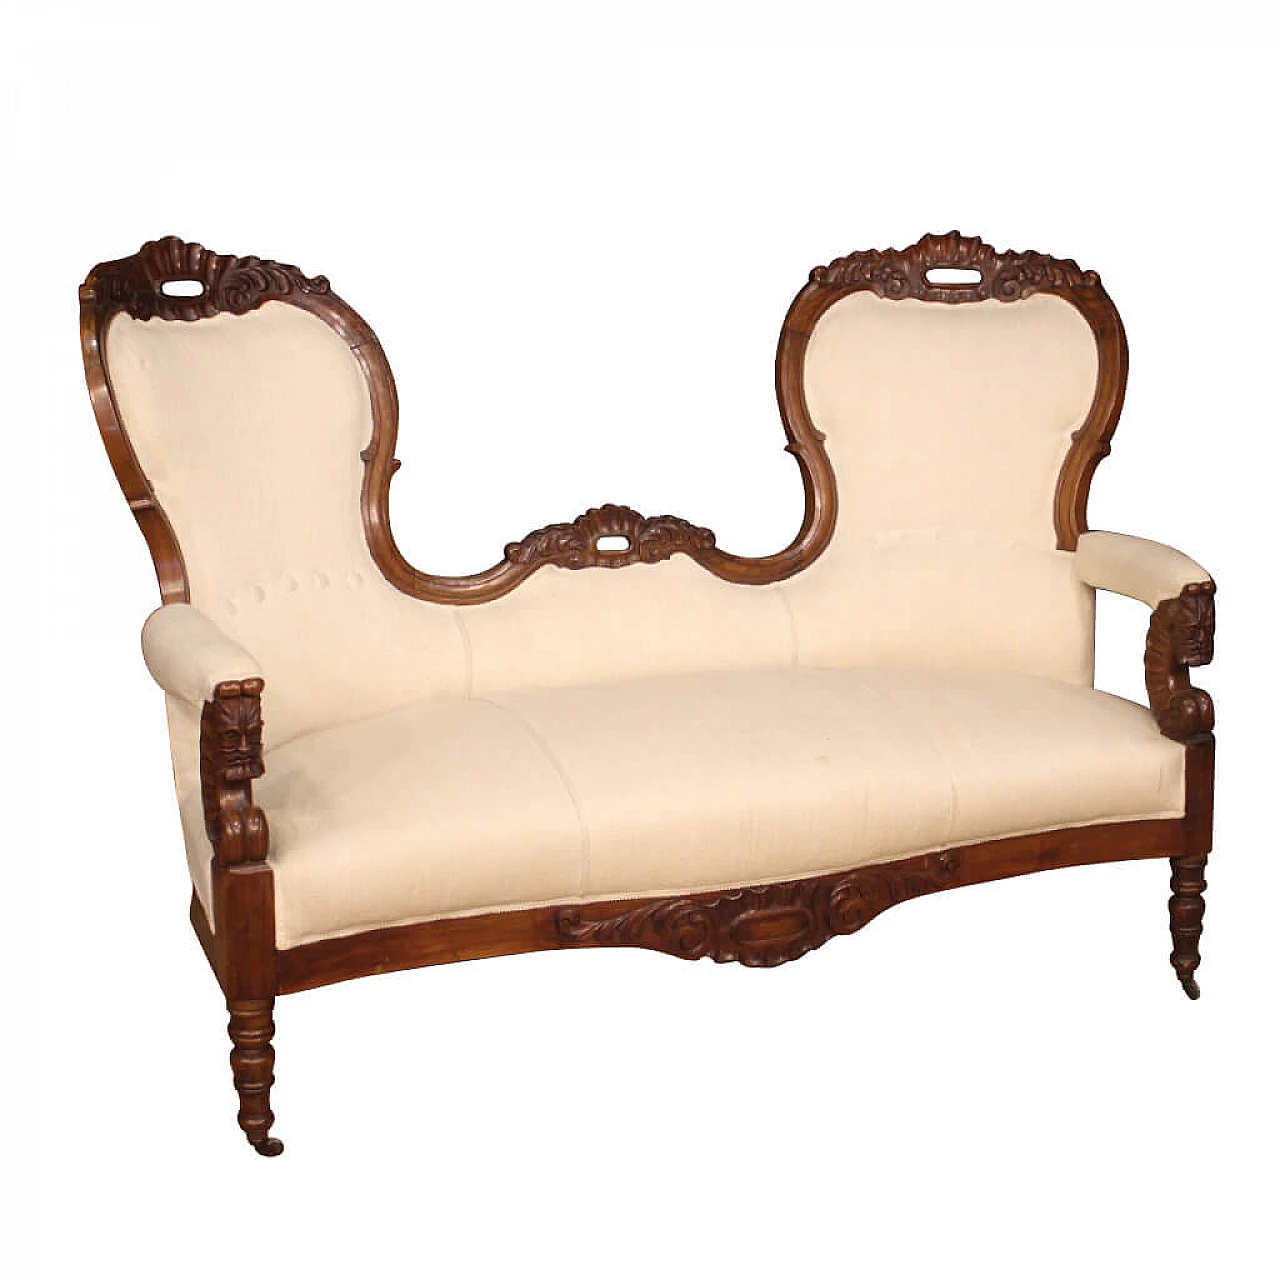 Walnut and fabric sofa with casters, late 19th century 1090747